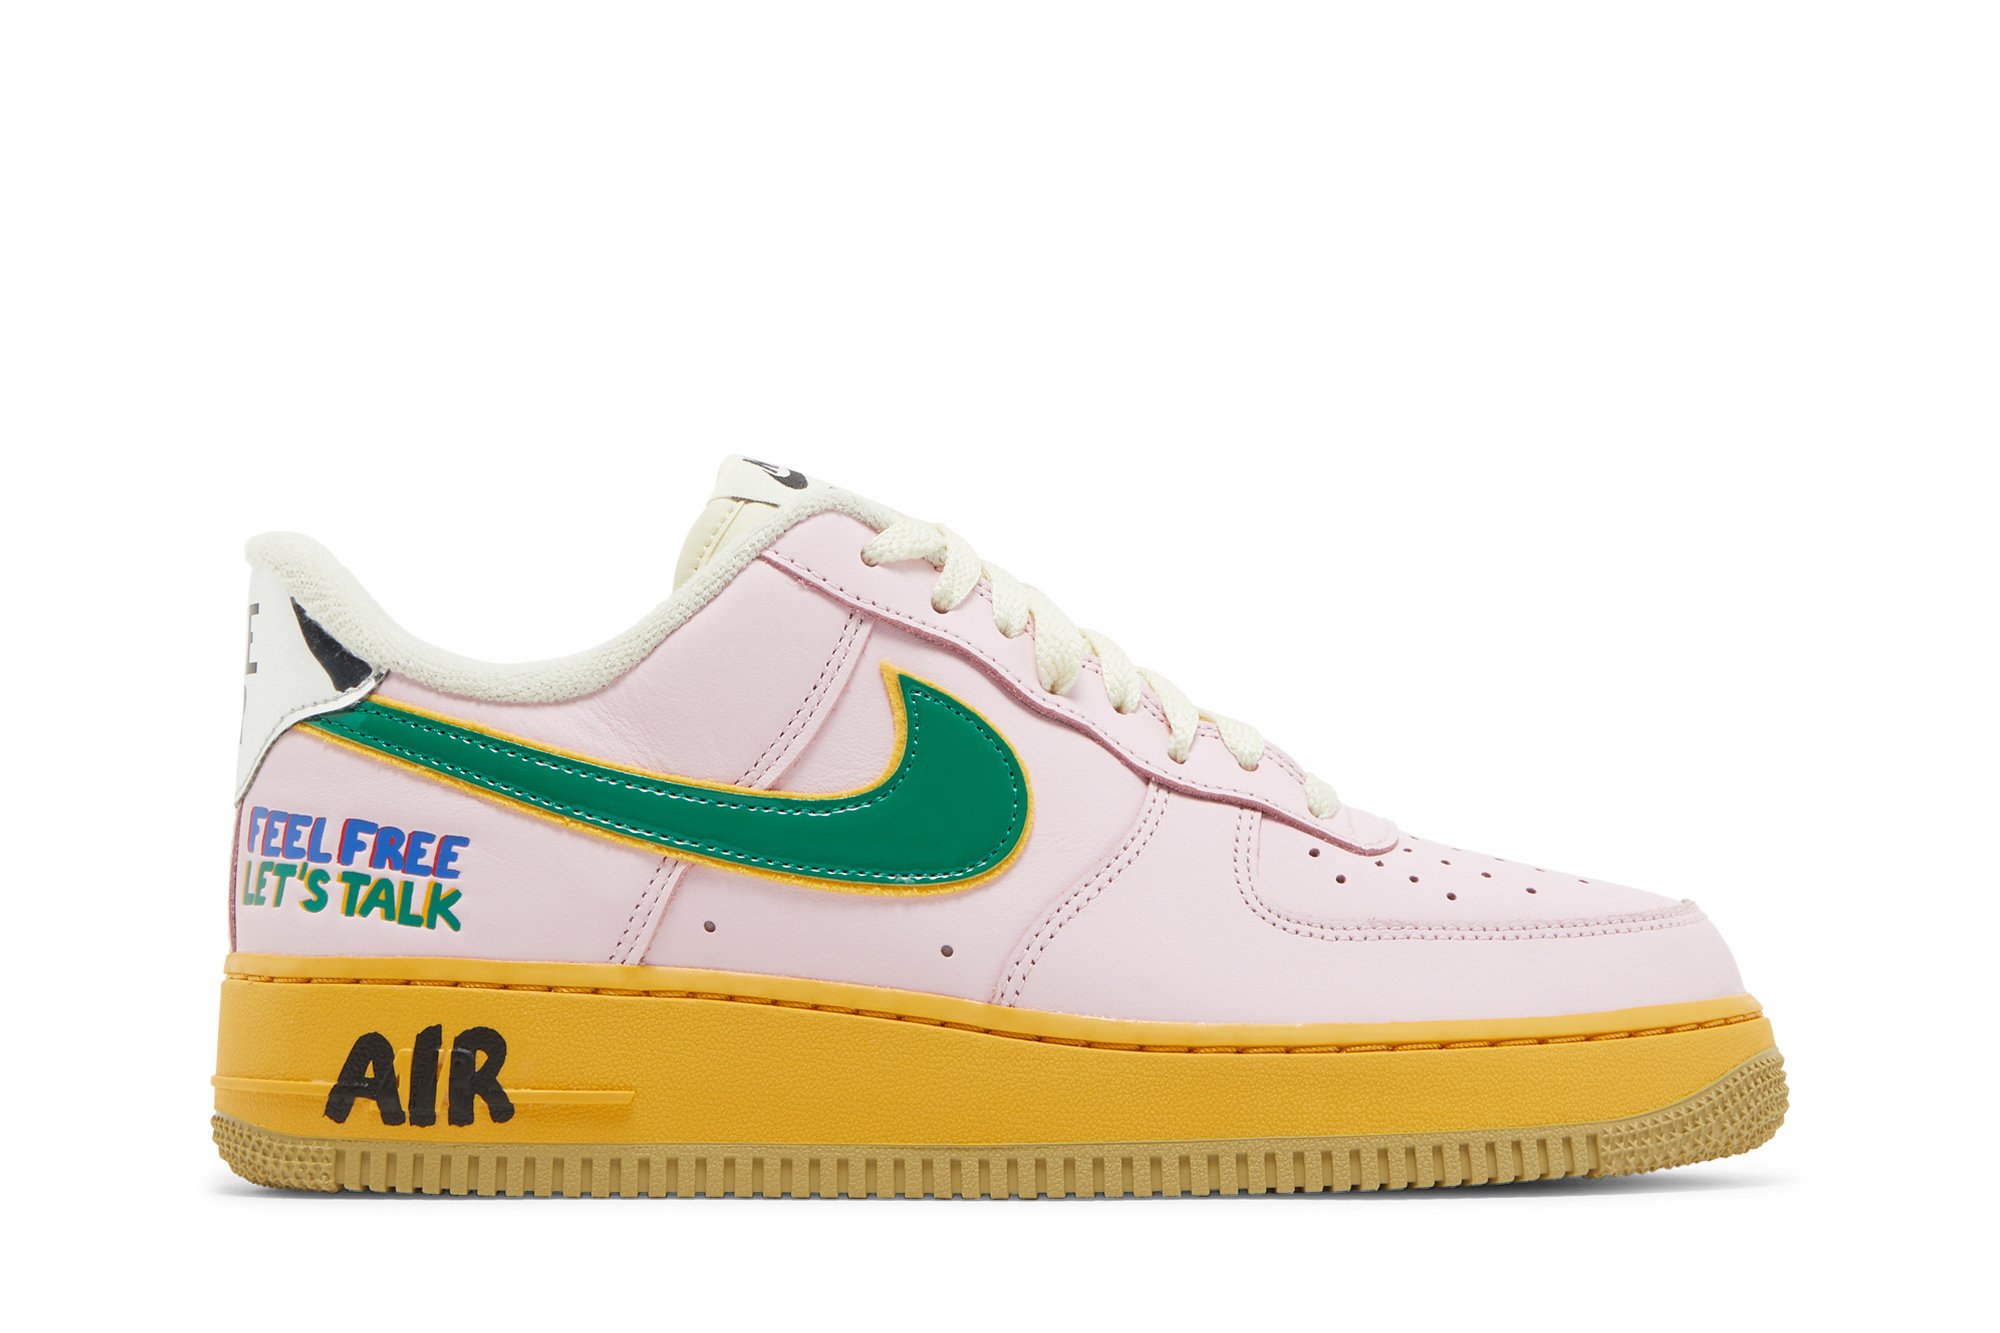 Air Force 1 Low 'Feel Free, Let's Talk'